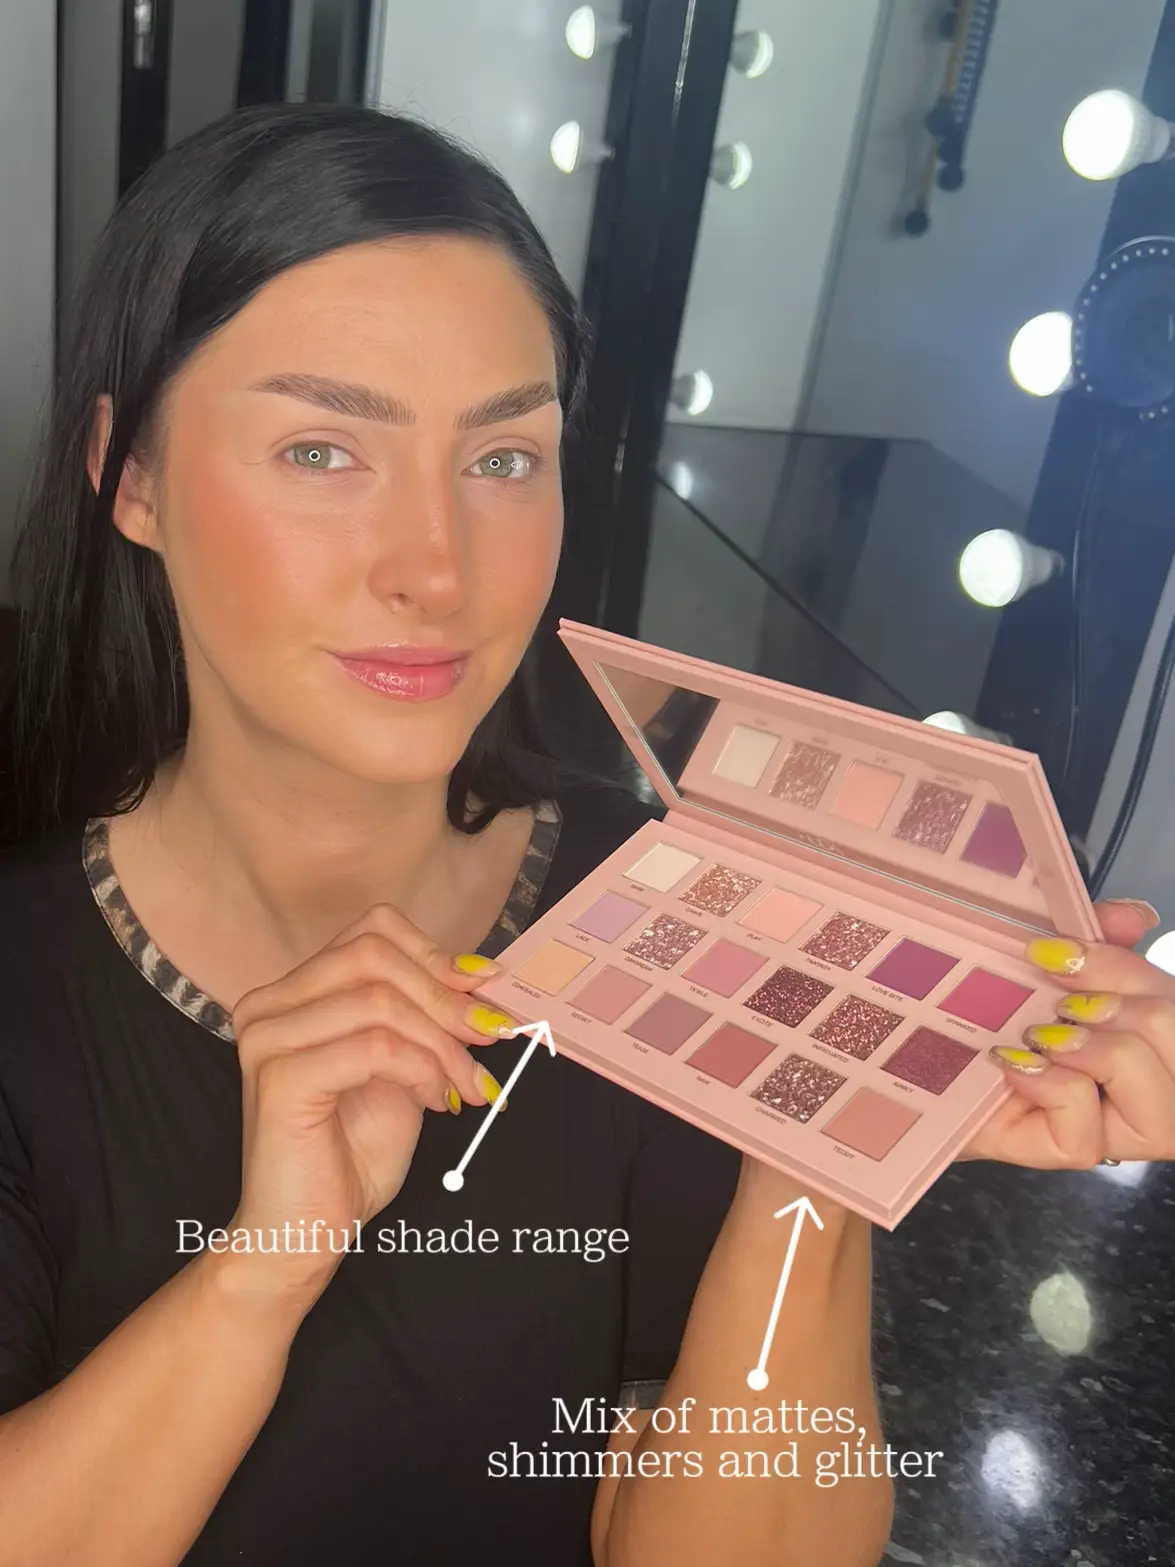 Product Review - New Nude Palette by Huda Beauty, Gallery posted by Rowena  Carhart